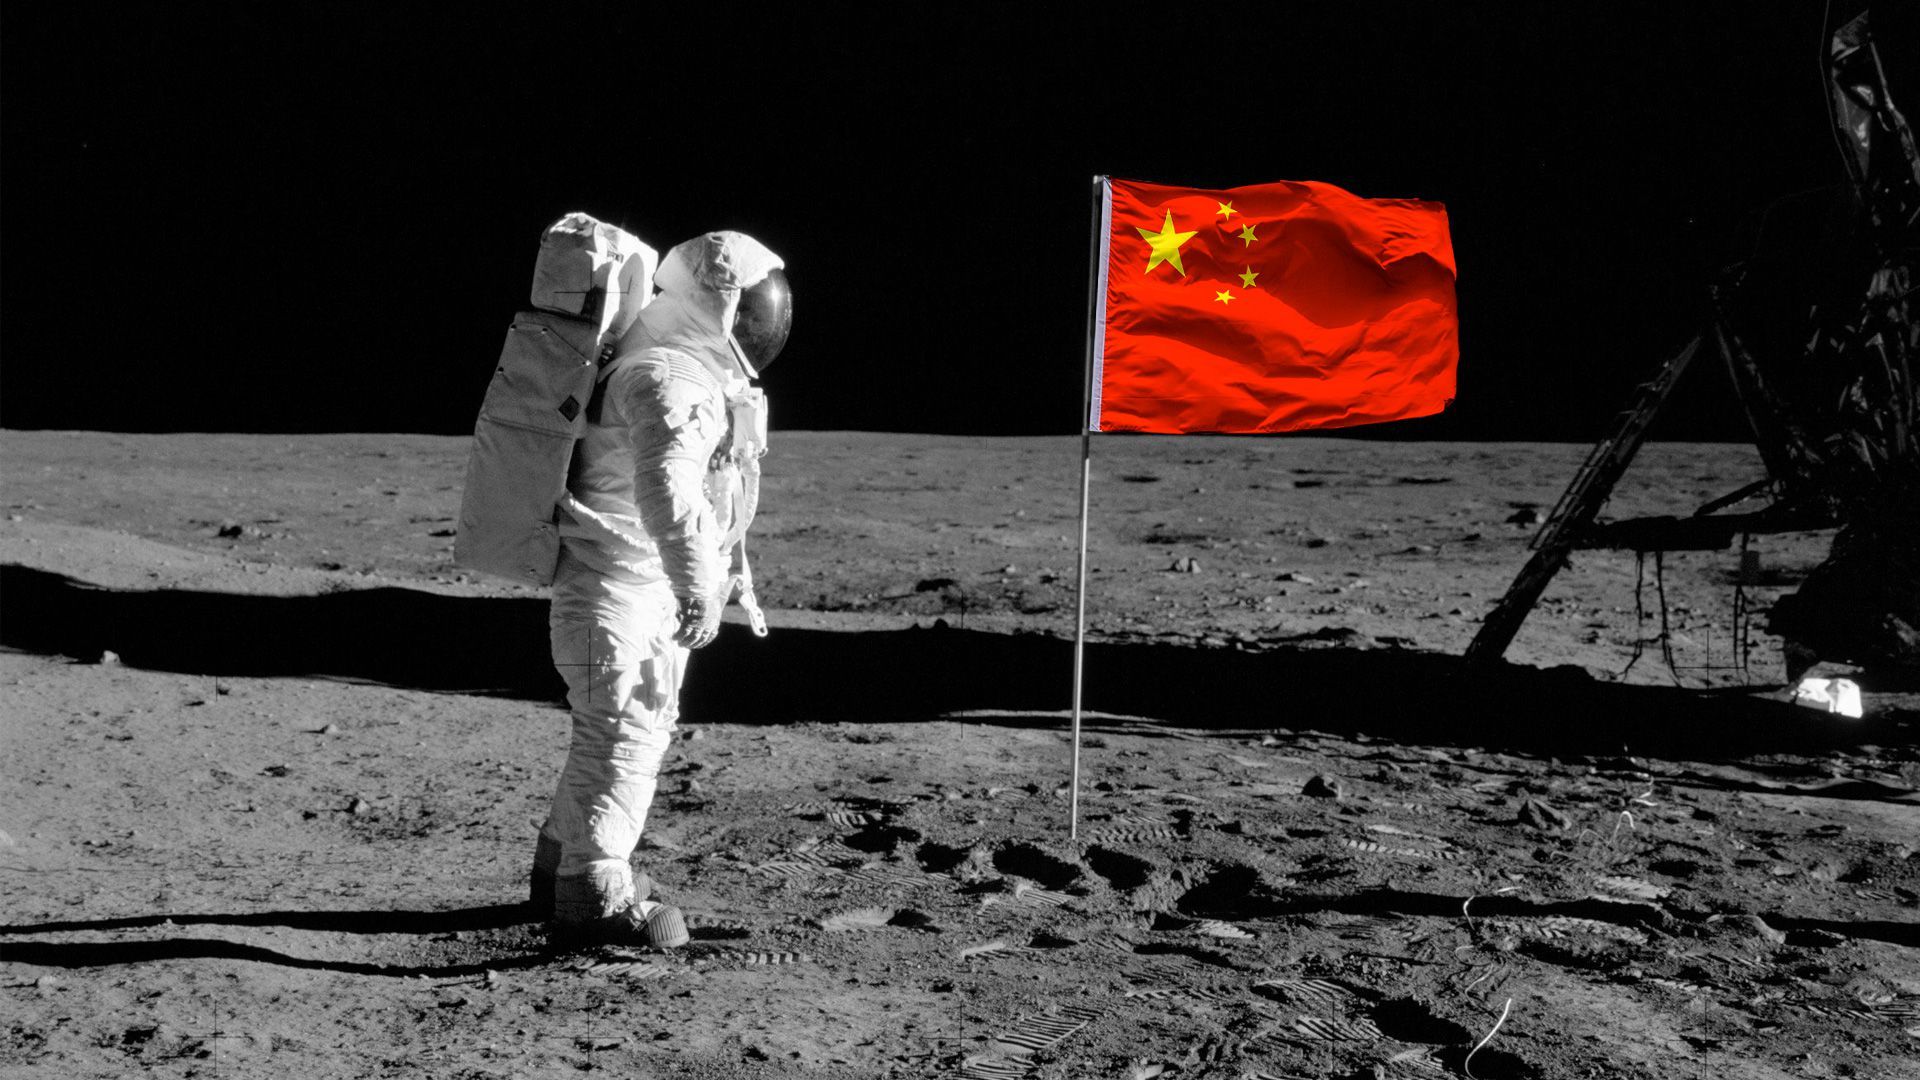 Illustration of astronaut on the moon with China flag